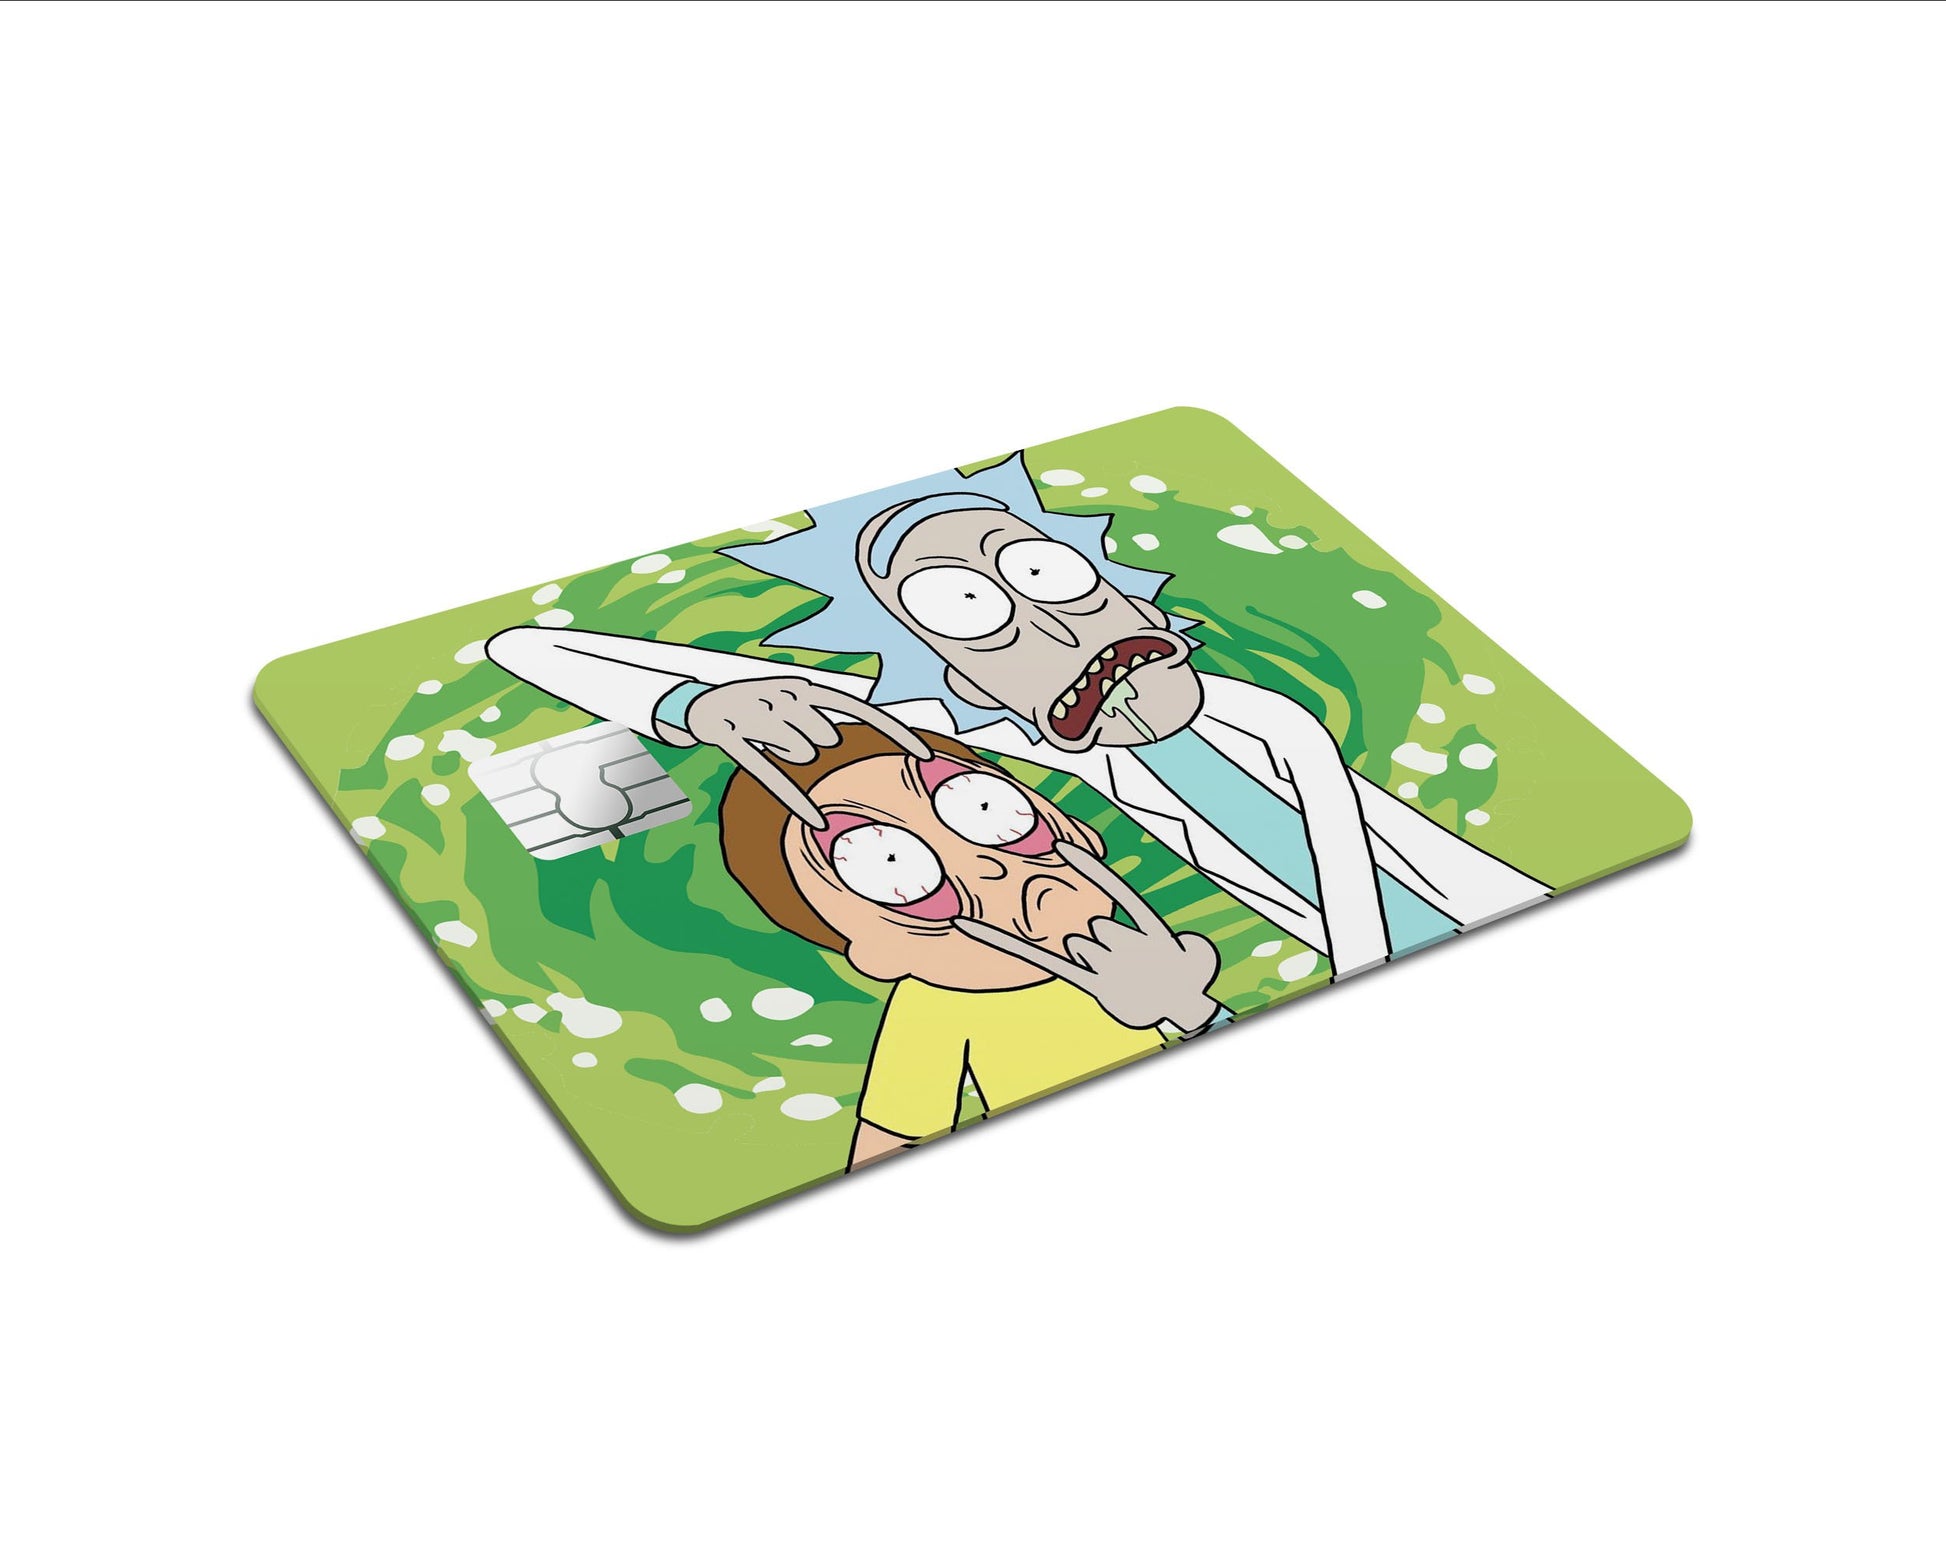 Anime Town Creations Credit Card Rick and Morty Open Your Eyes Morty Window Skins - Pop culture Rick and Morty Skin